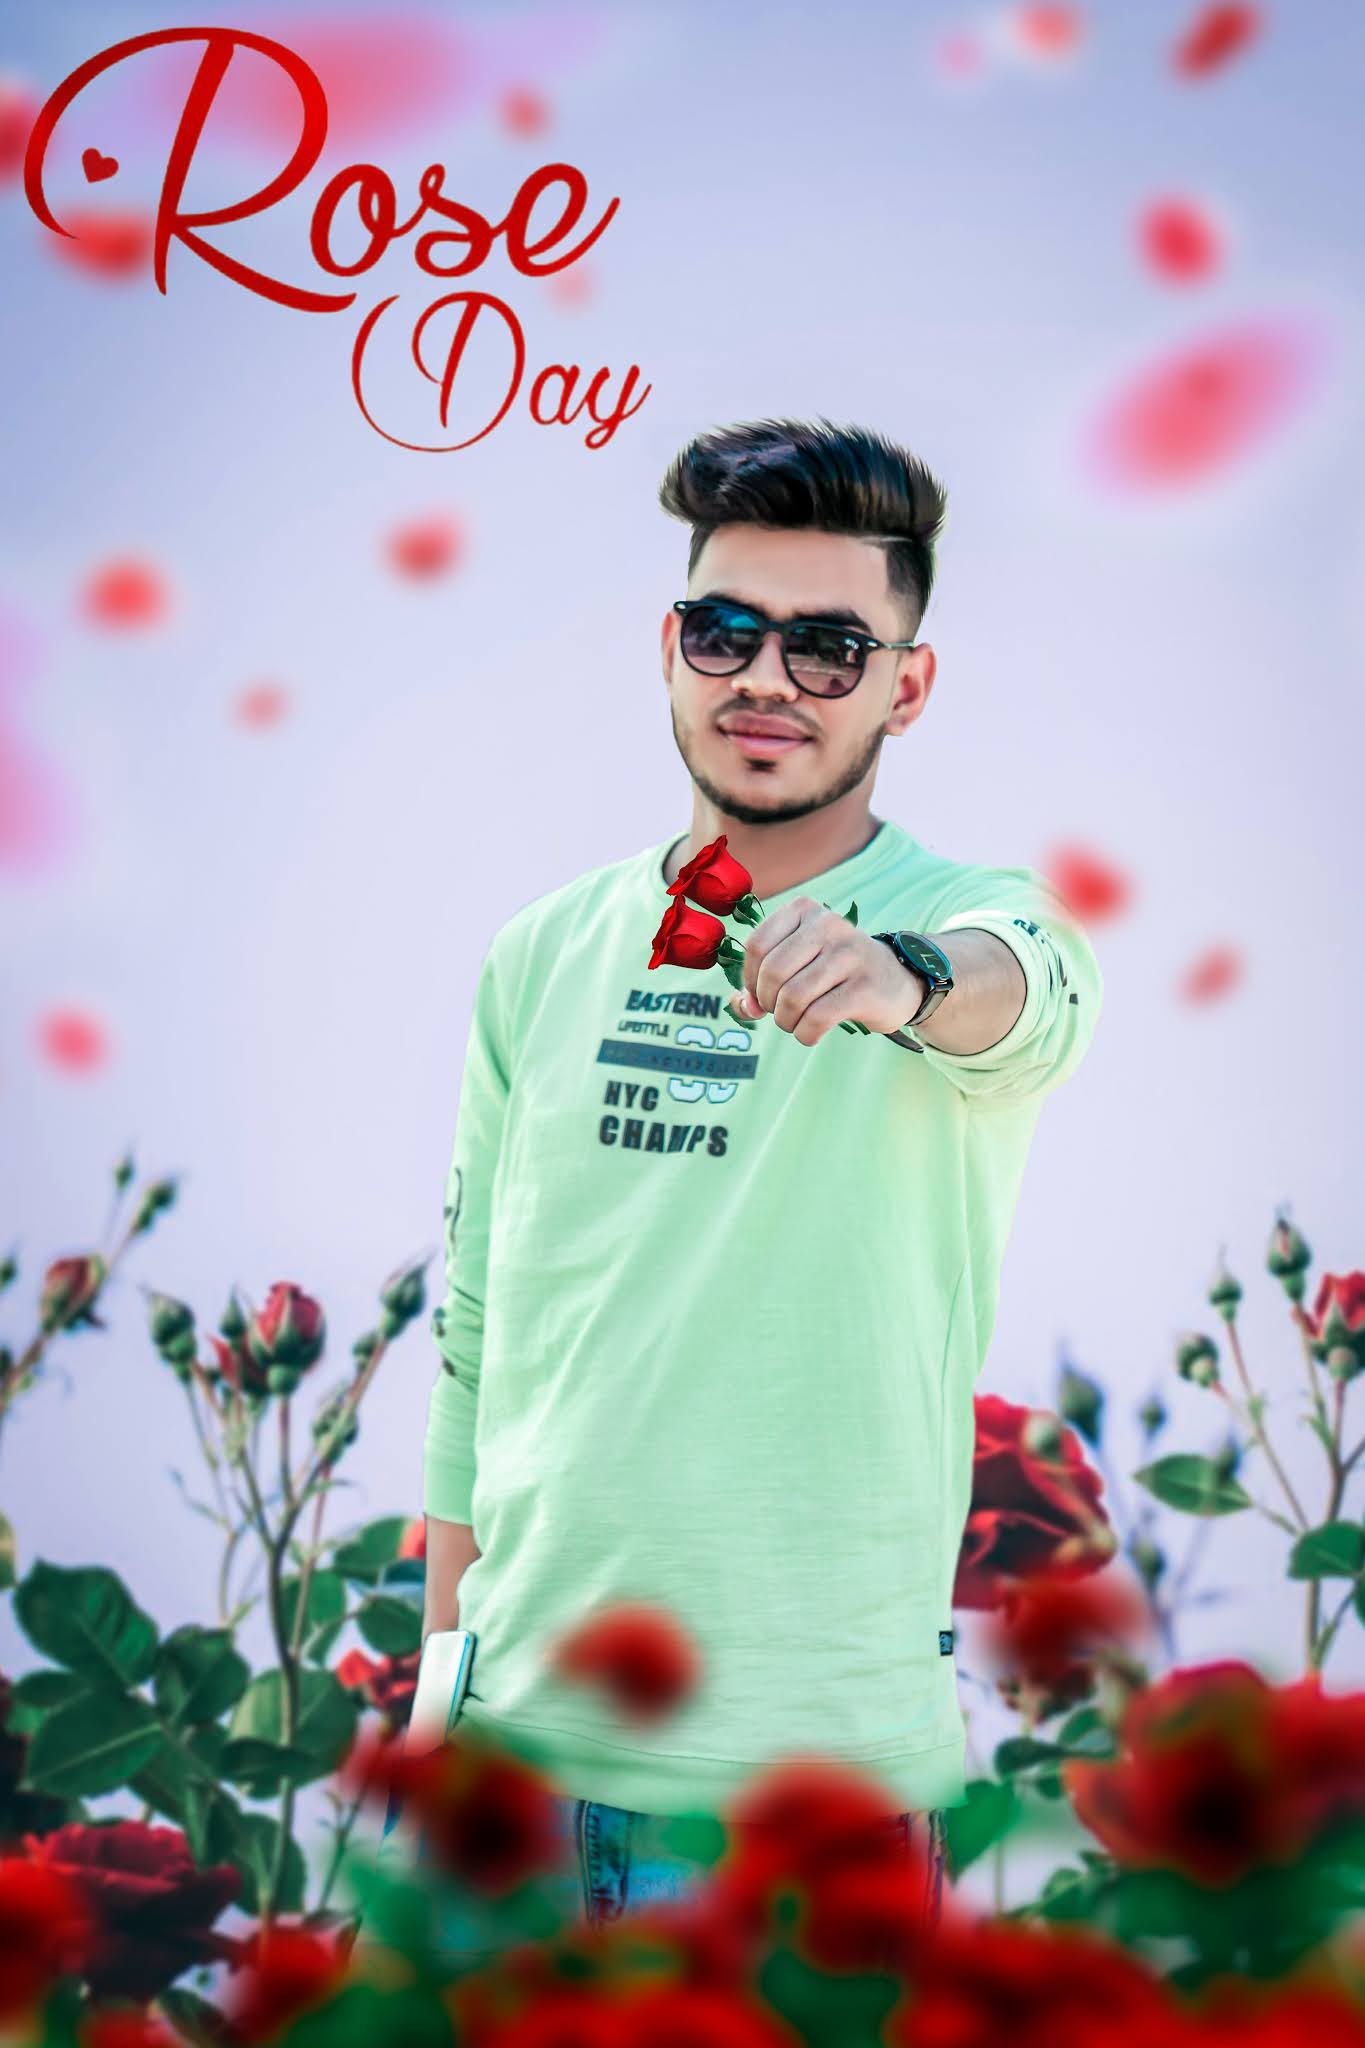 how to happy rose day special photo editing HD Background Download - Zaman  Editz